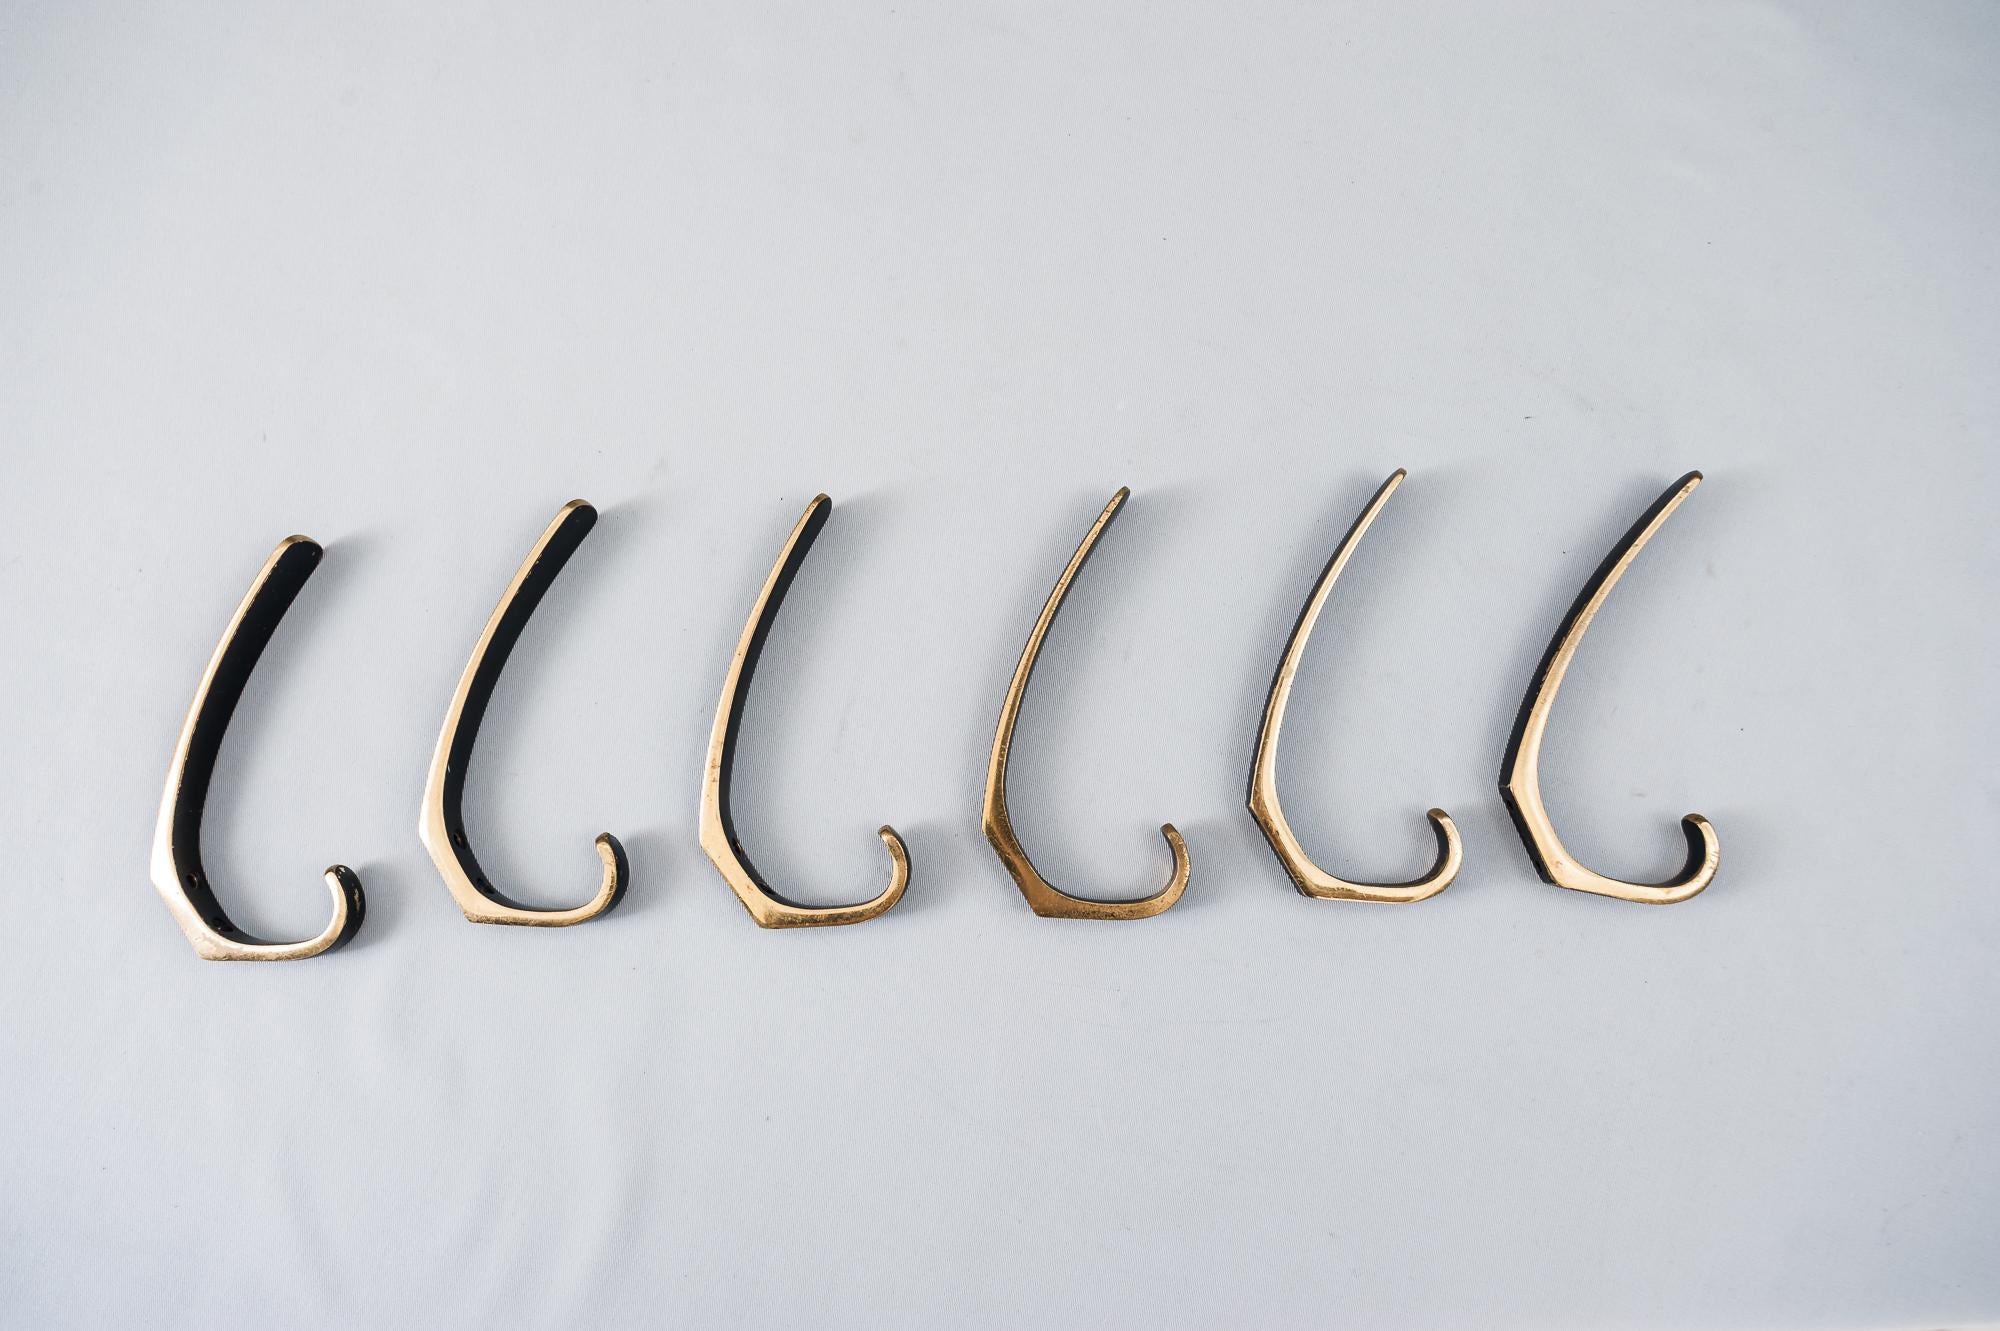 6 hooks by Hertha Baller, circa 1950s
Original condition
Priced and sold per piece.